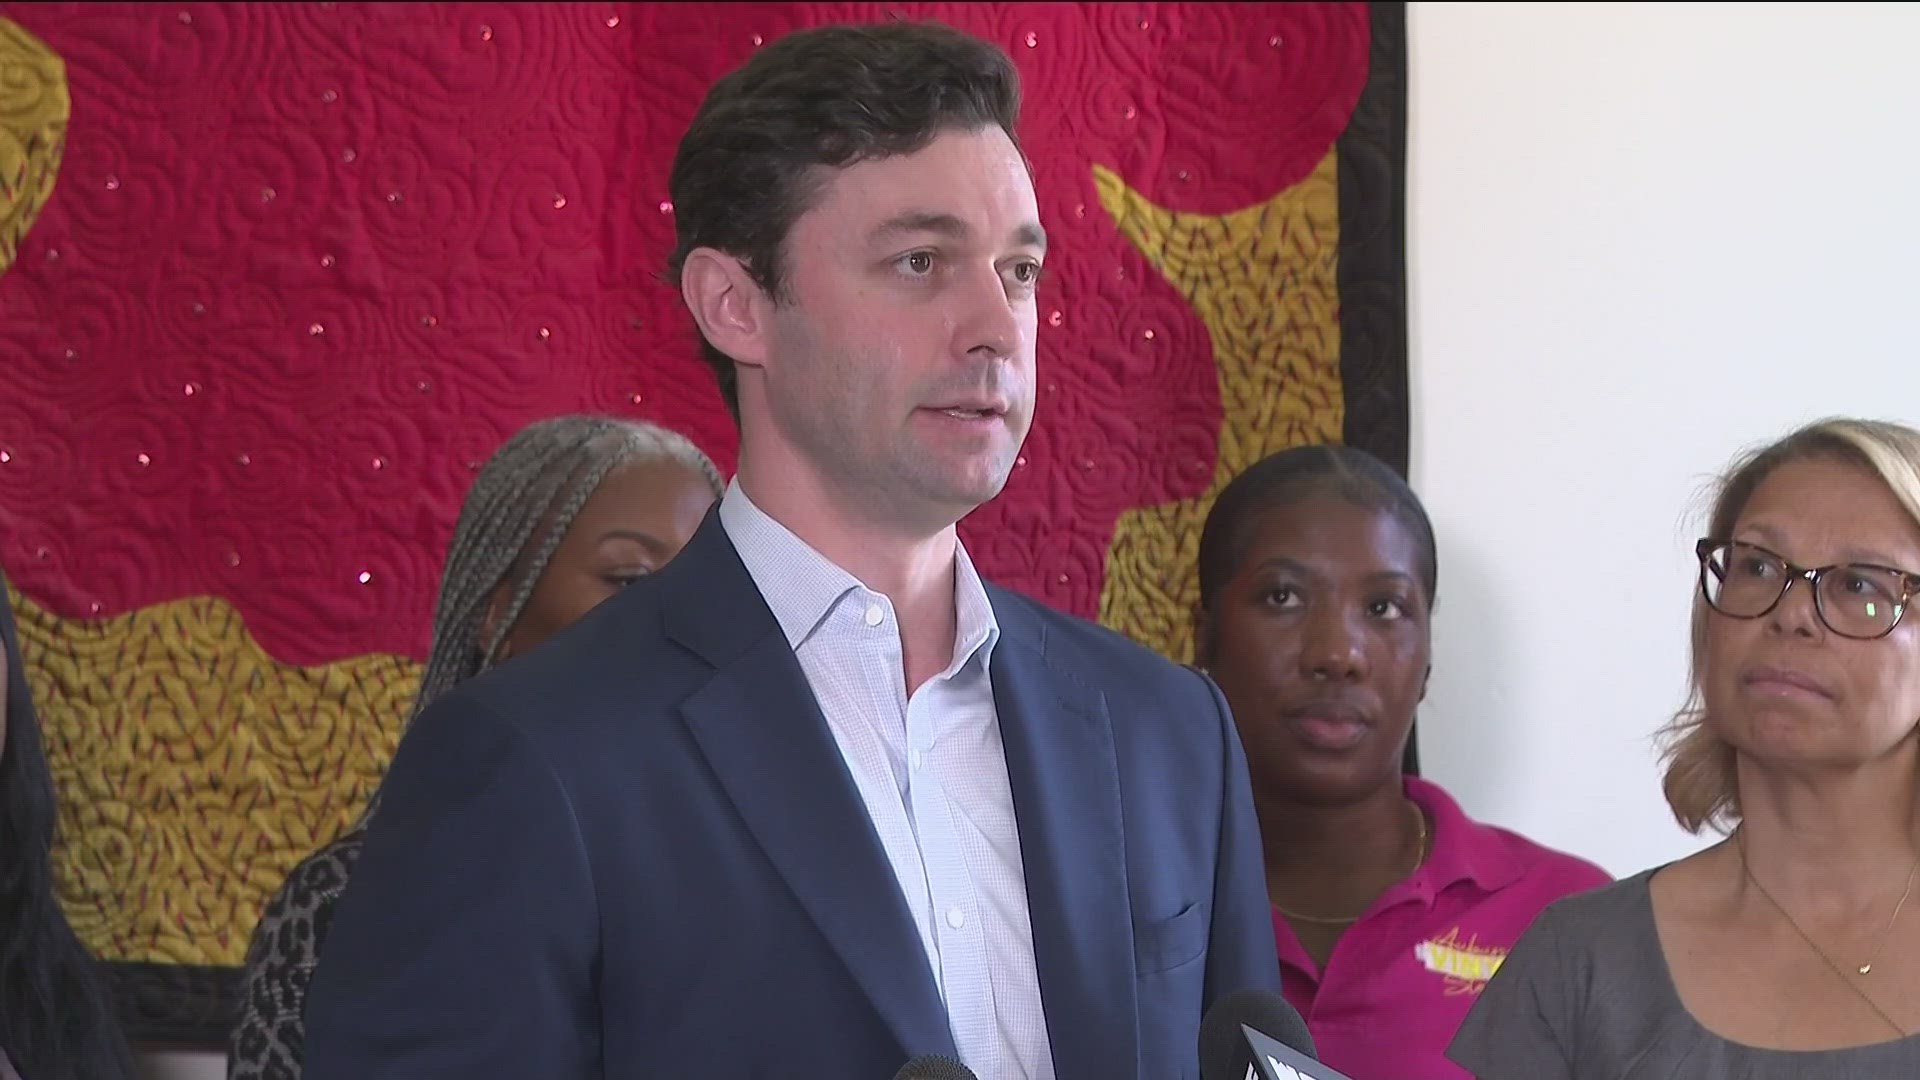 Sen. Jon Ossoff spent time Monday in Atlanta's Sweet Auburn neighborhood, where he answered questions about last week's mass shooting in Midtown.